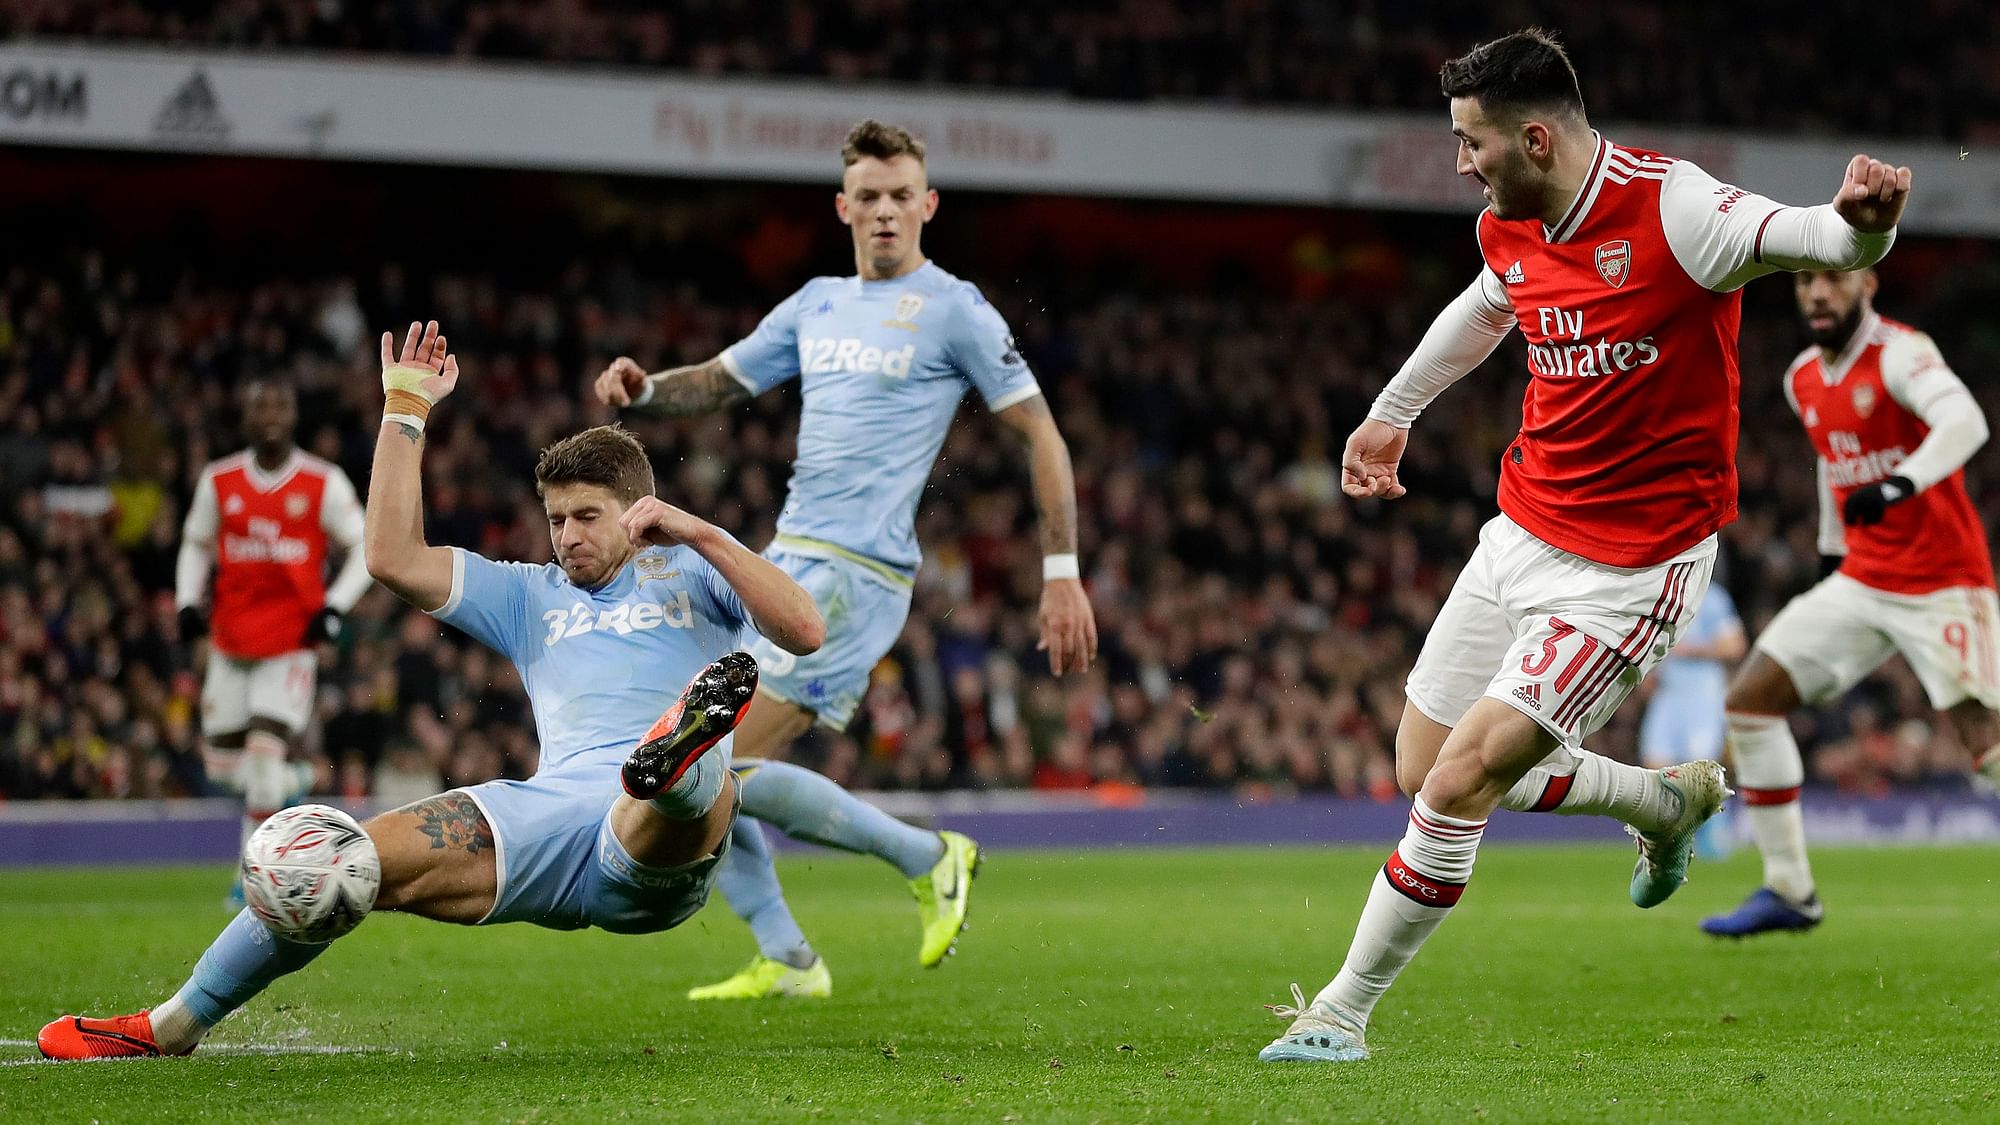 Arsenal’s Sead Kolasinac, right, shoots on goal during the English FA Cup soccer match between Arsenal and Leeds United at the Emirates Stadium in London, Monday, Jan. 6, 2020.